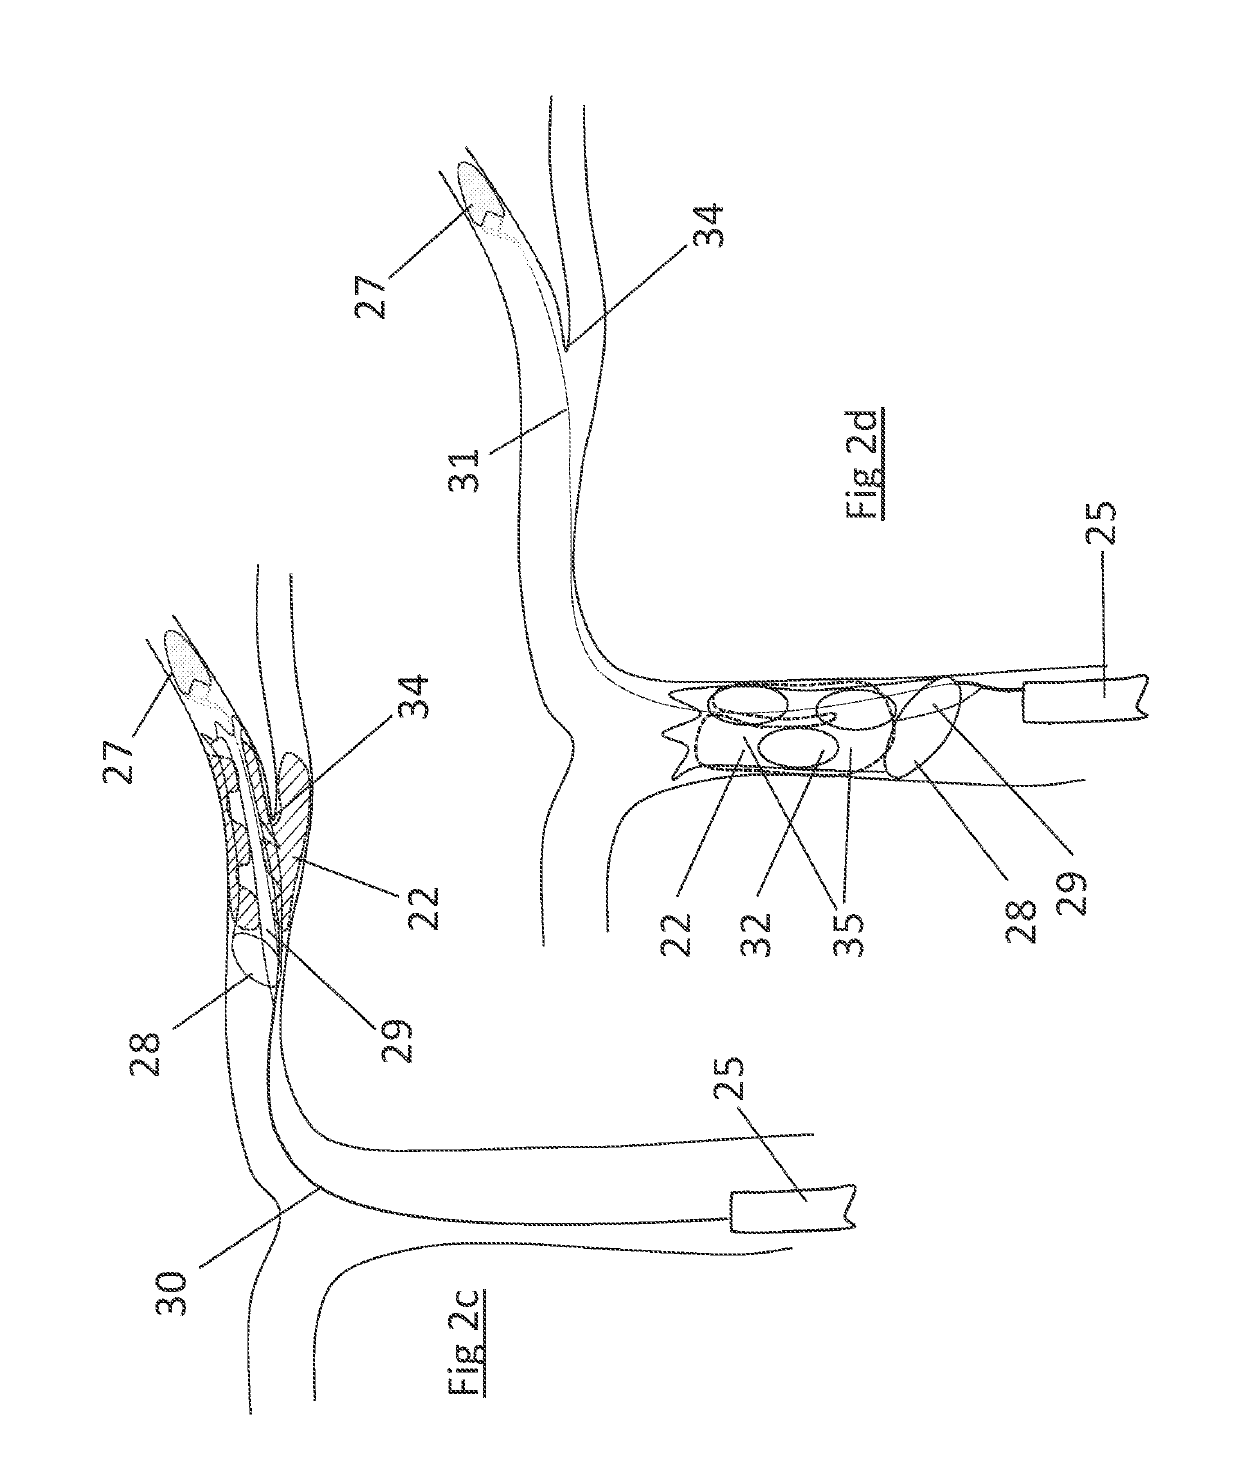 Clot retrieval device for removing clot from a blood vessel